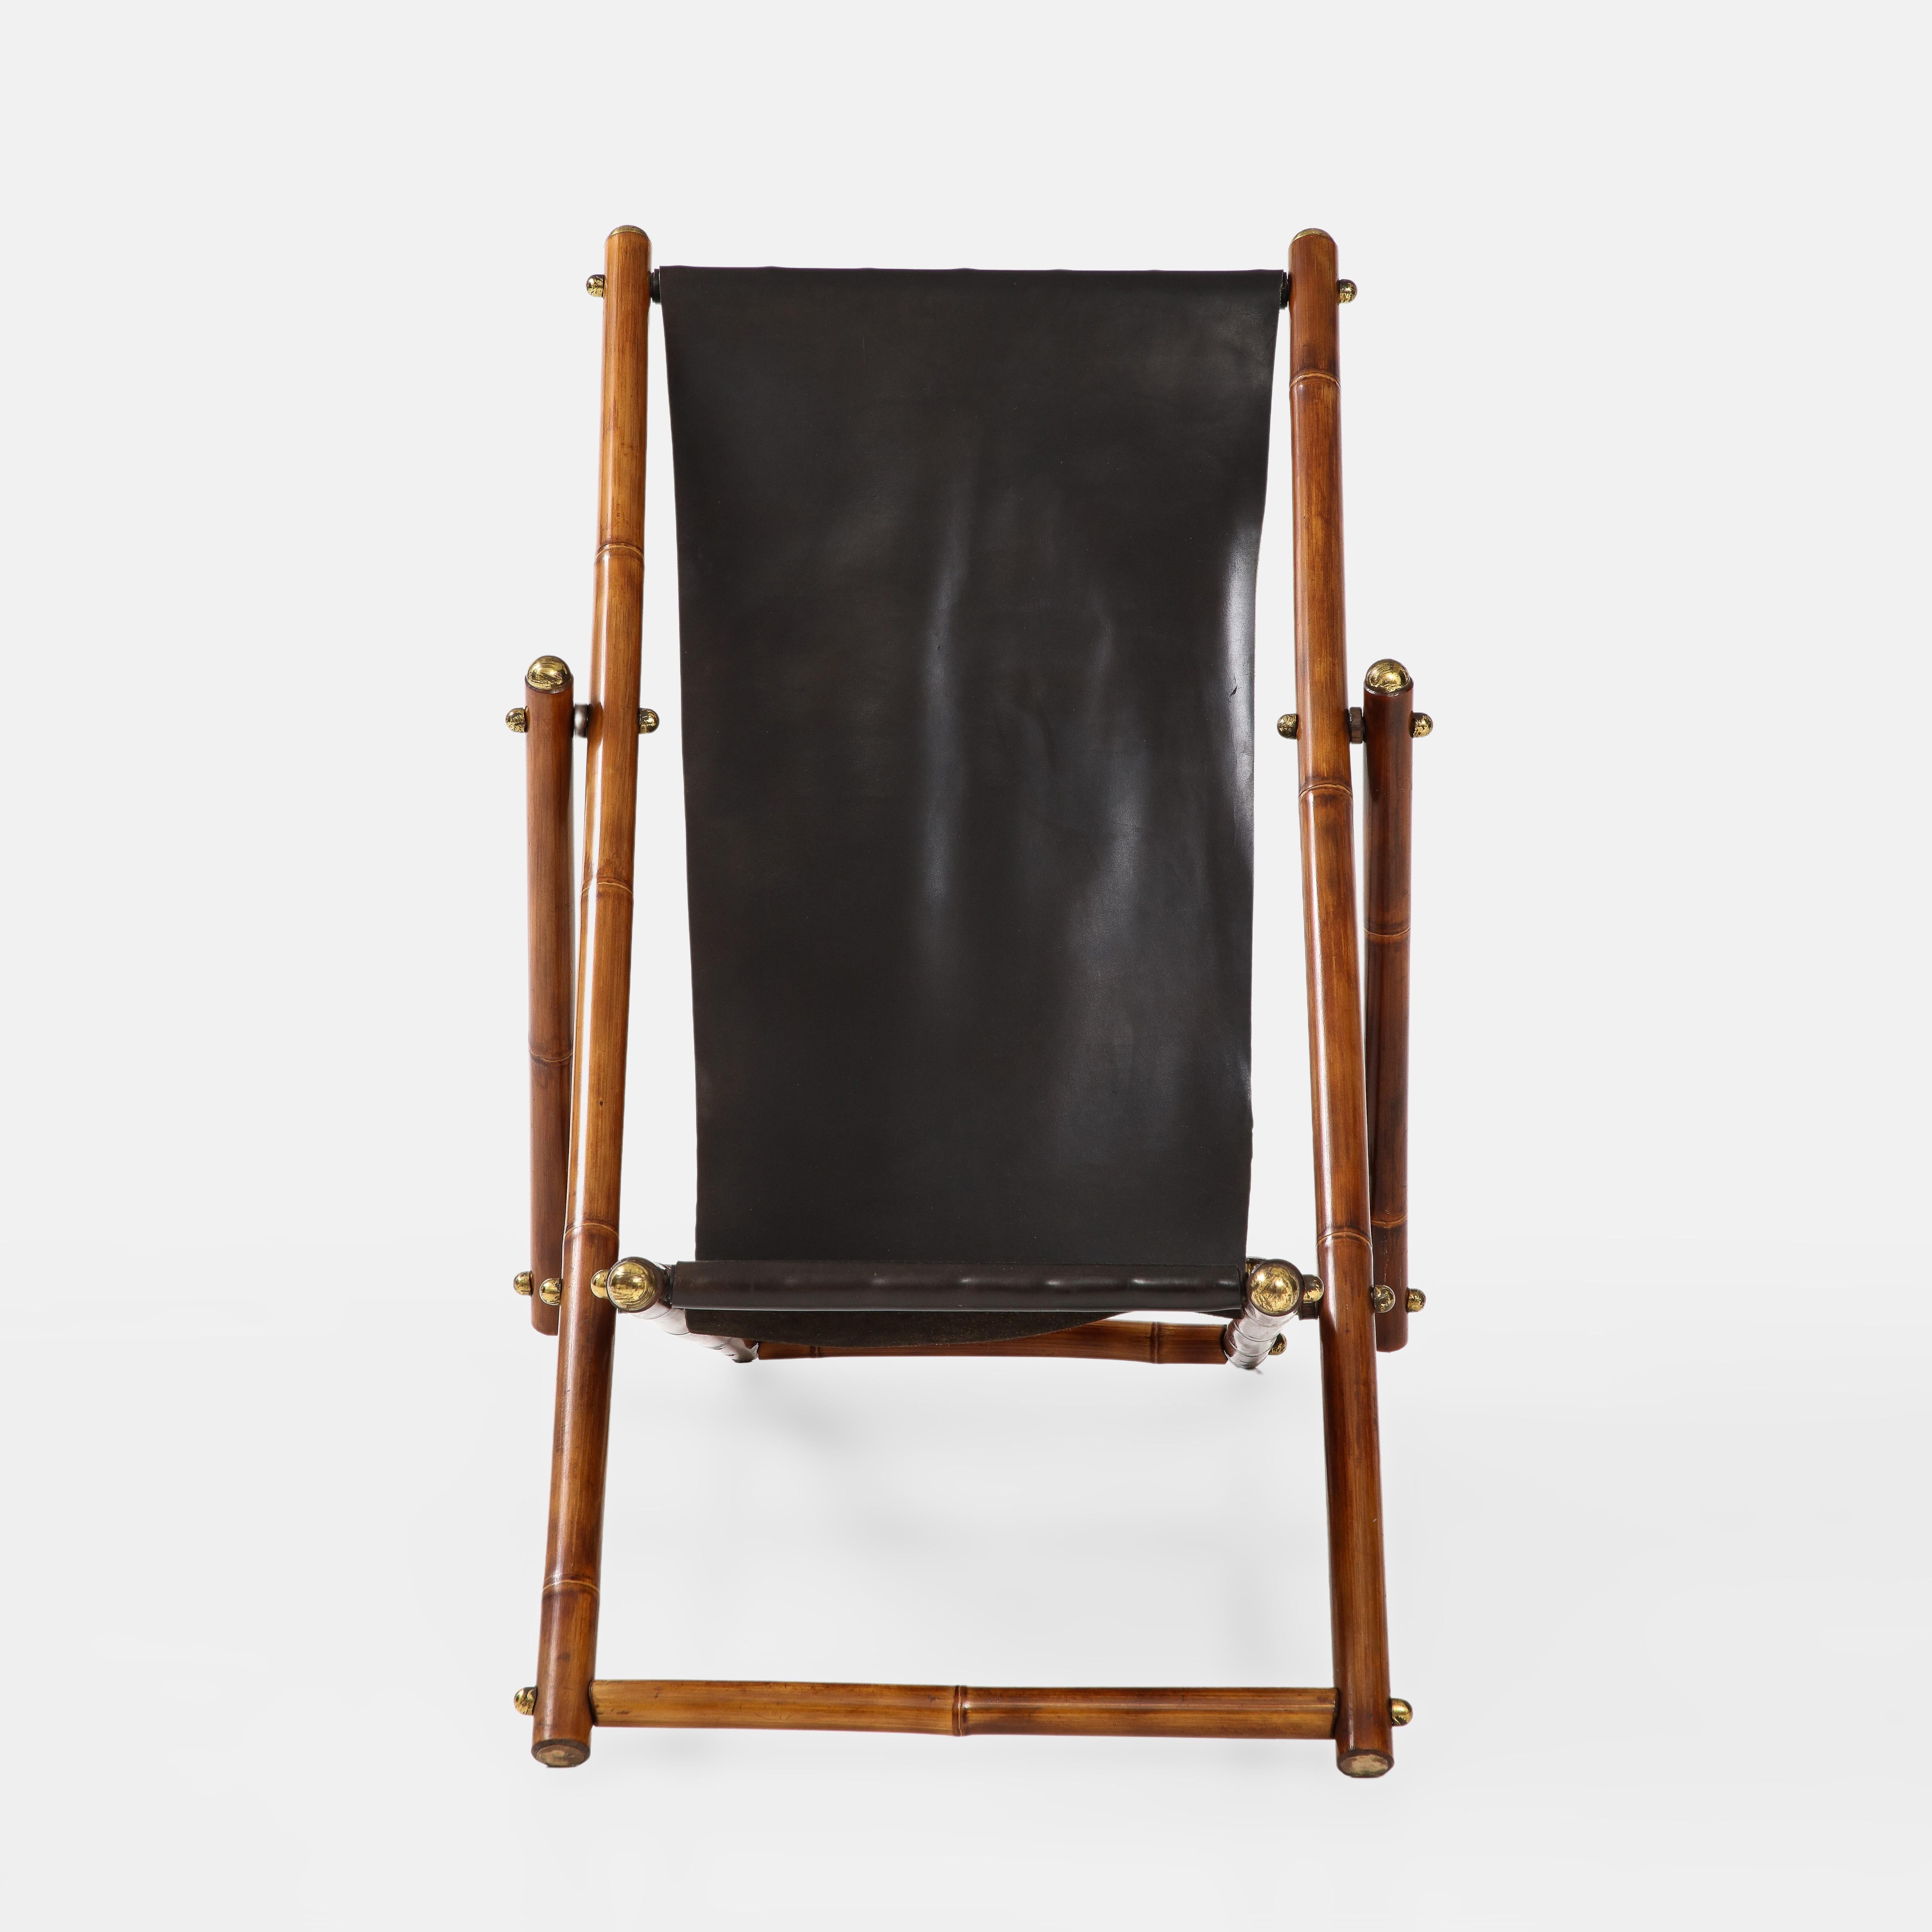 Italian adjustable reclining campaign folding chair in lacquered bamboo, original black leather sling, and brass details, 1970s.  This incredibly chic and modern campaign chair has beautiful details throughout including the architectural thick